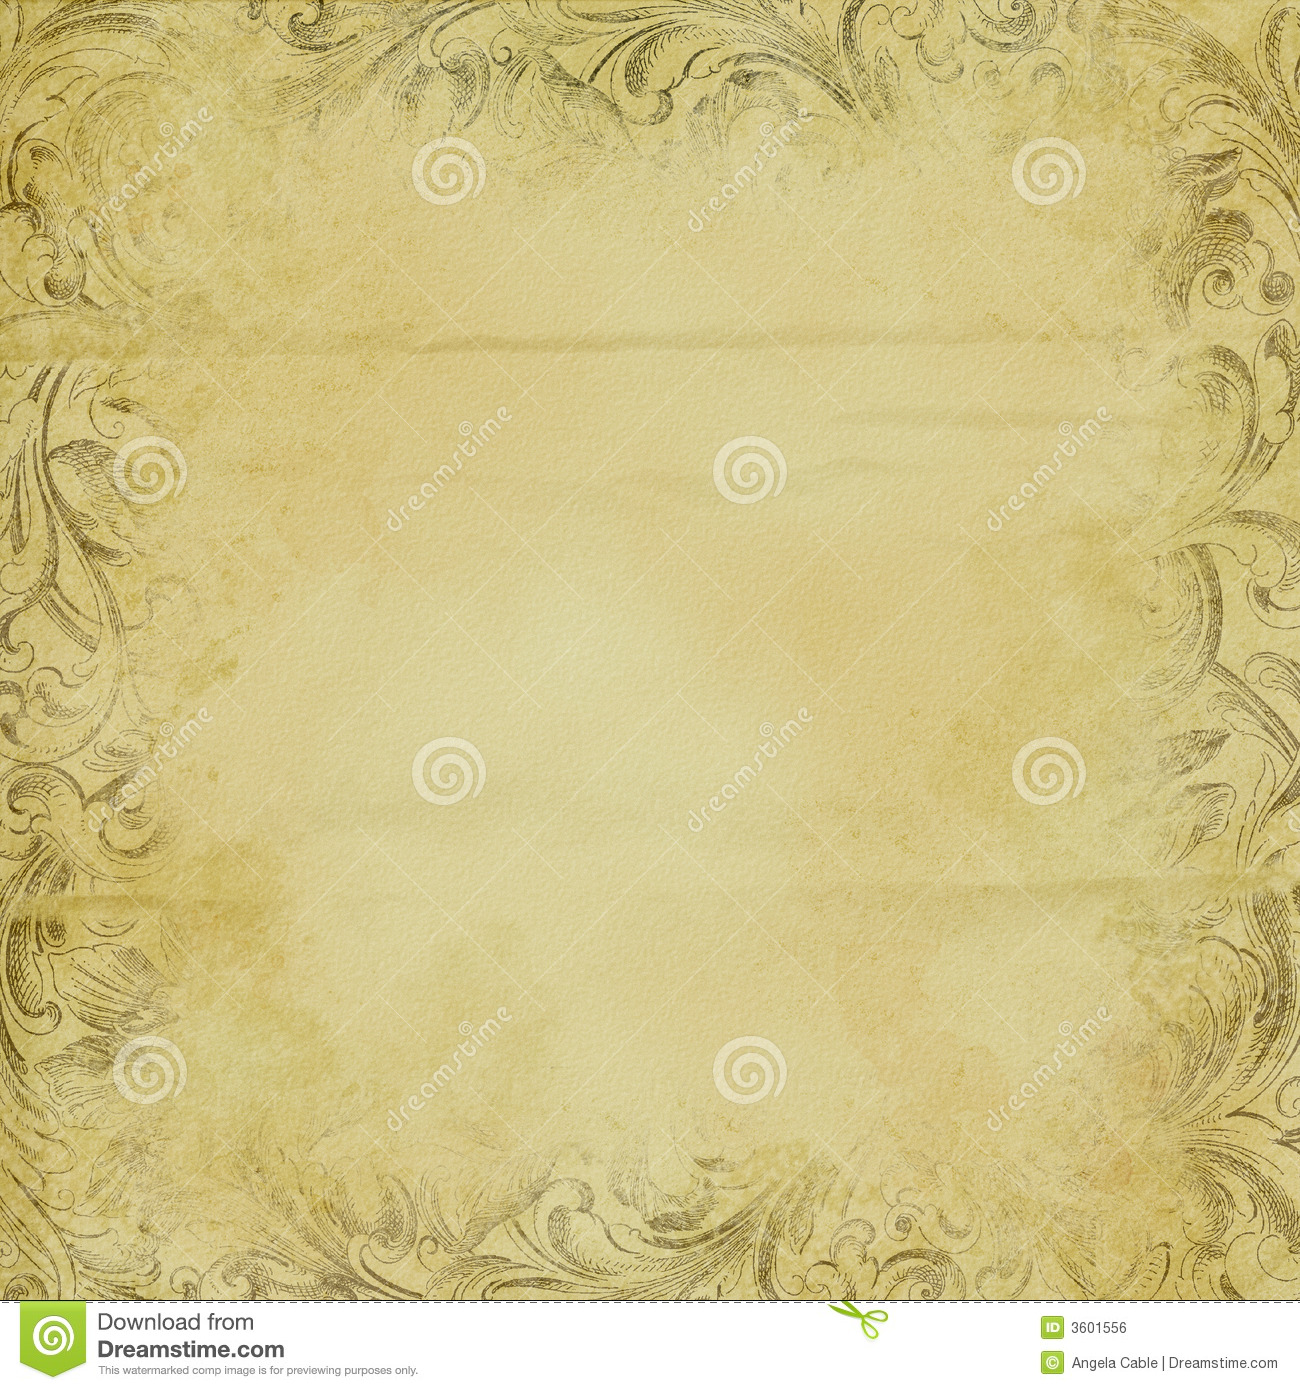 Created Grunge Background Distressed Paper With A Fancy Border